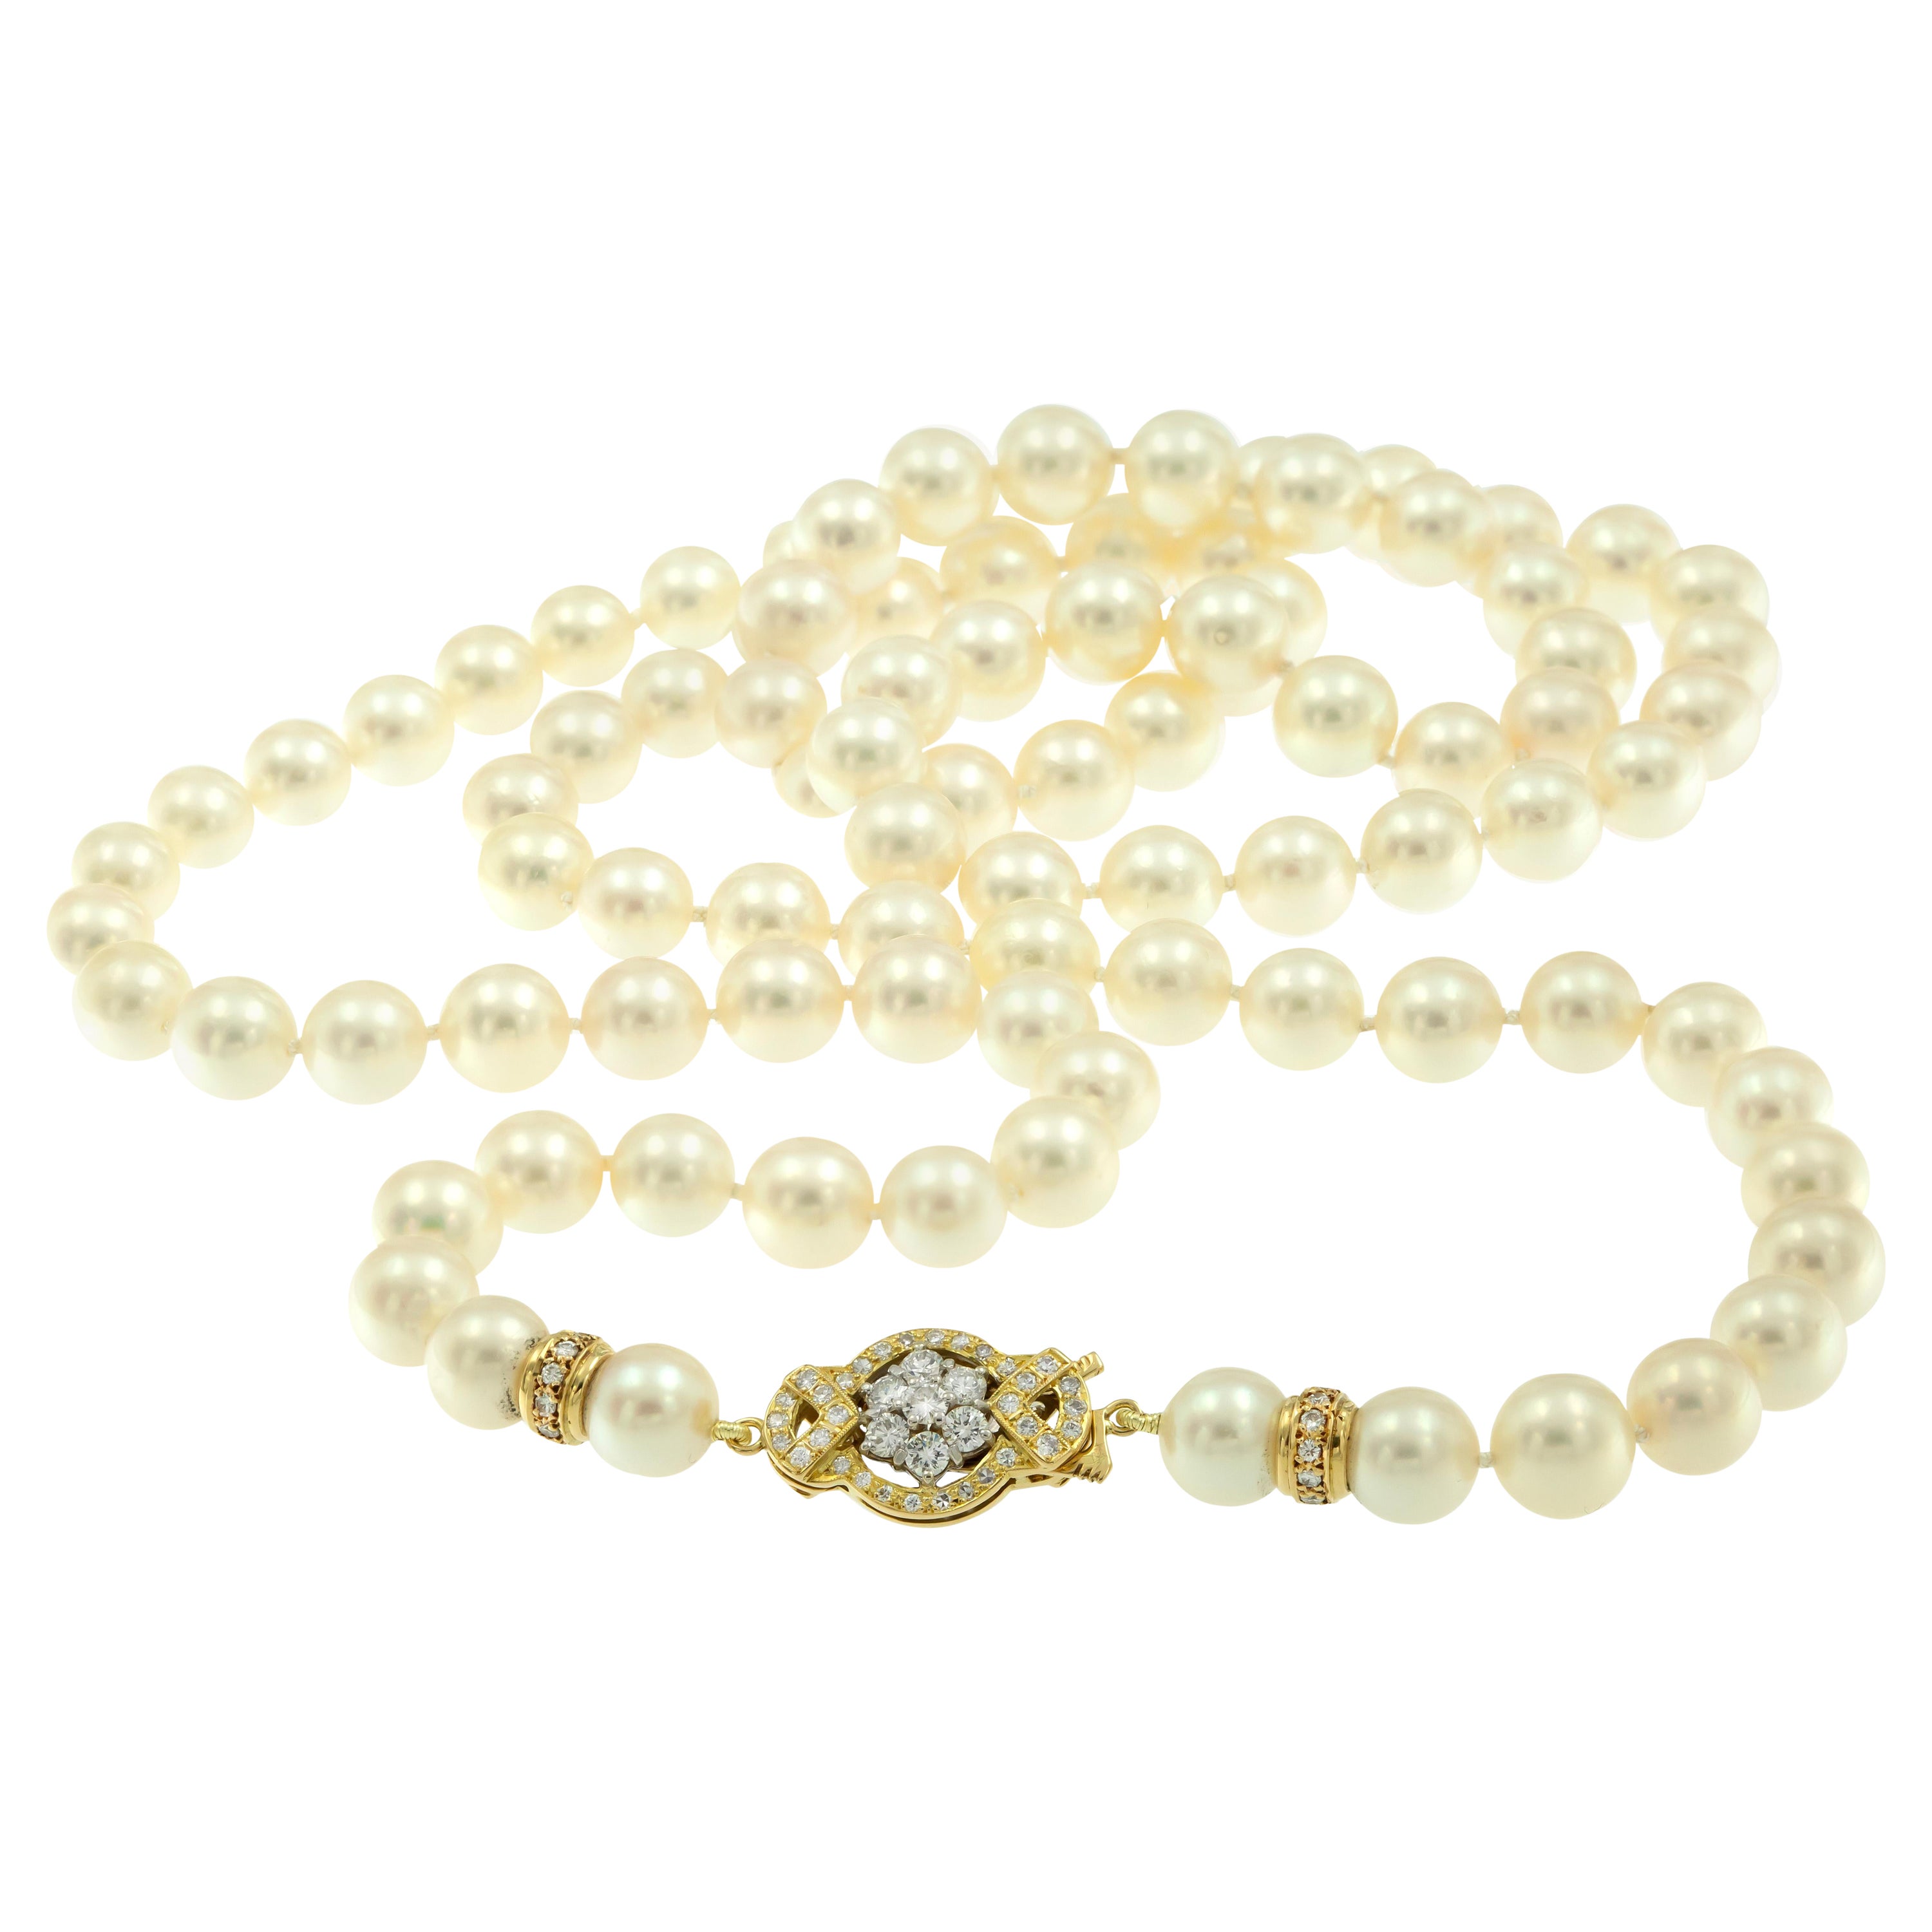 Modern Opera Length Cultured Pearl and Diamond Necklace, circa 1990s